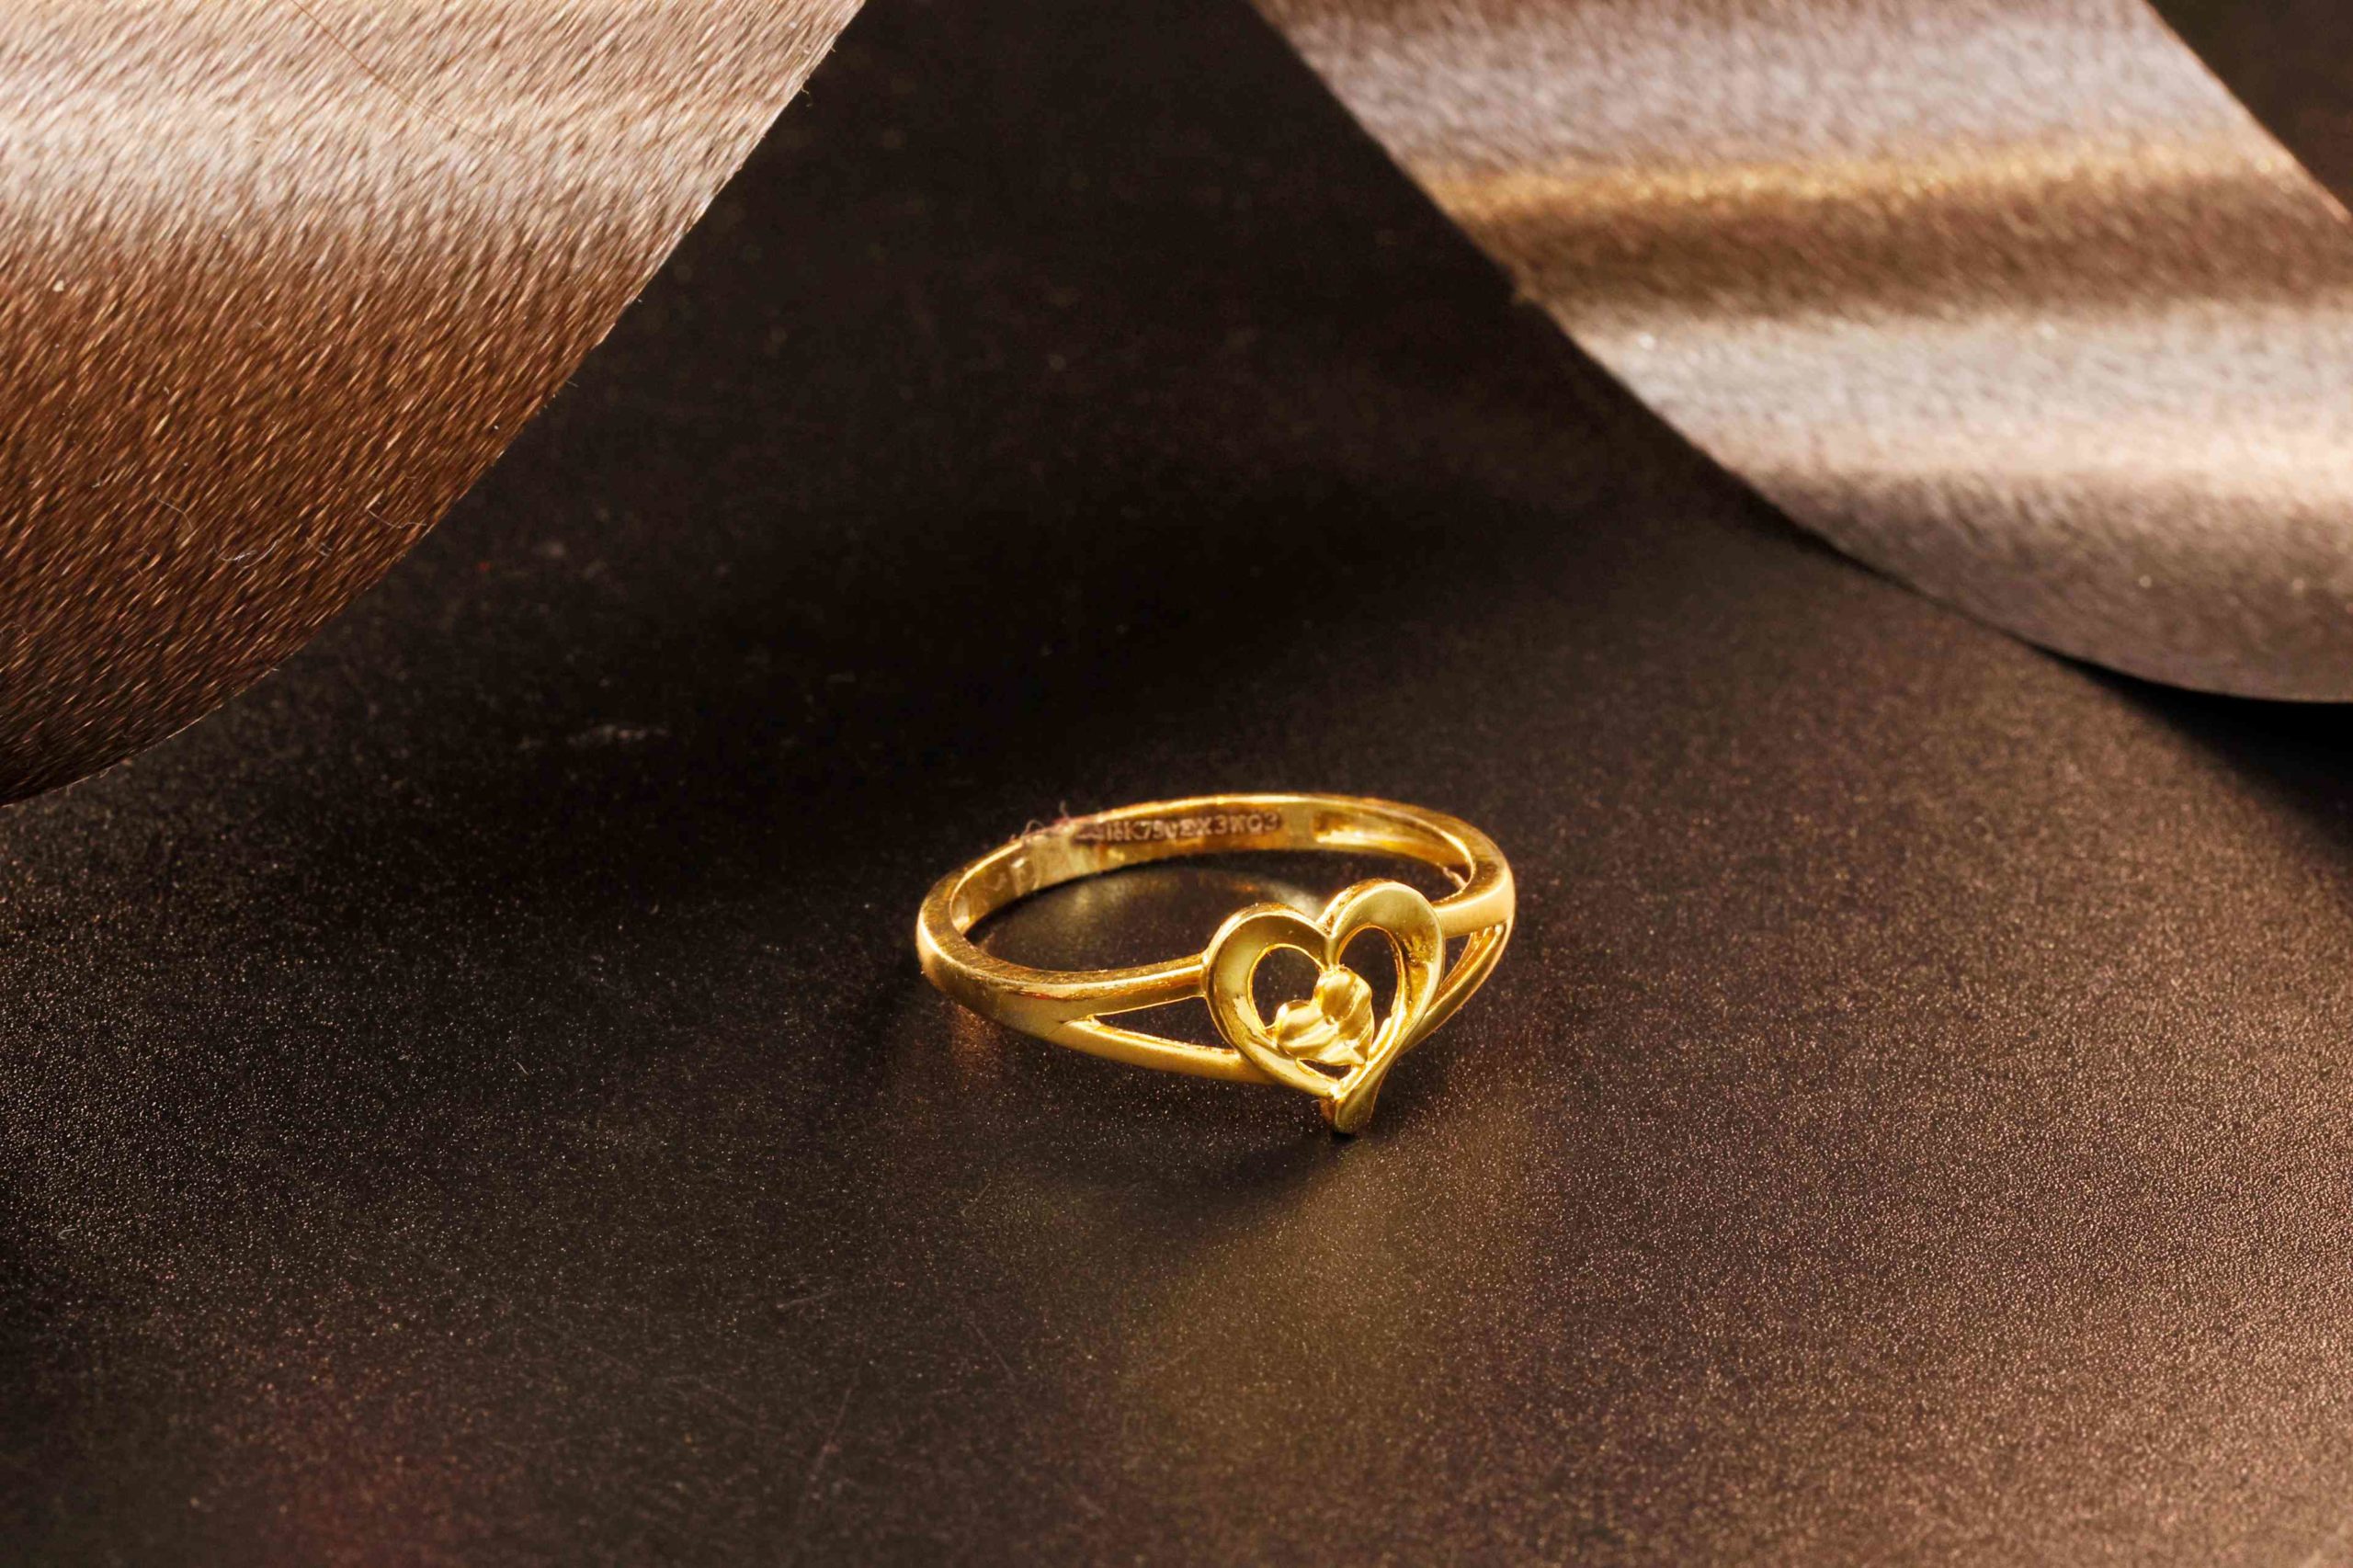 Ladies' Nugget Ring in 14K Gold | Zales